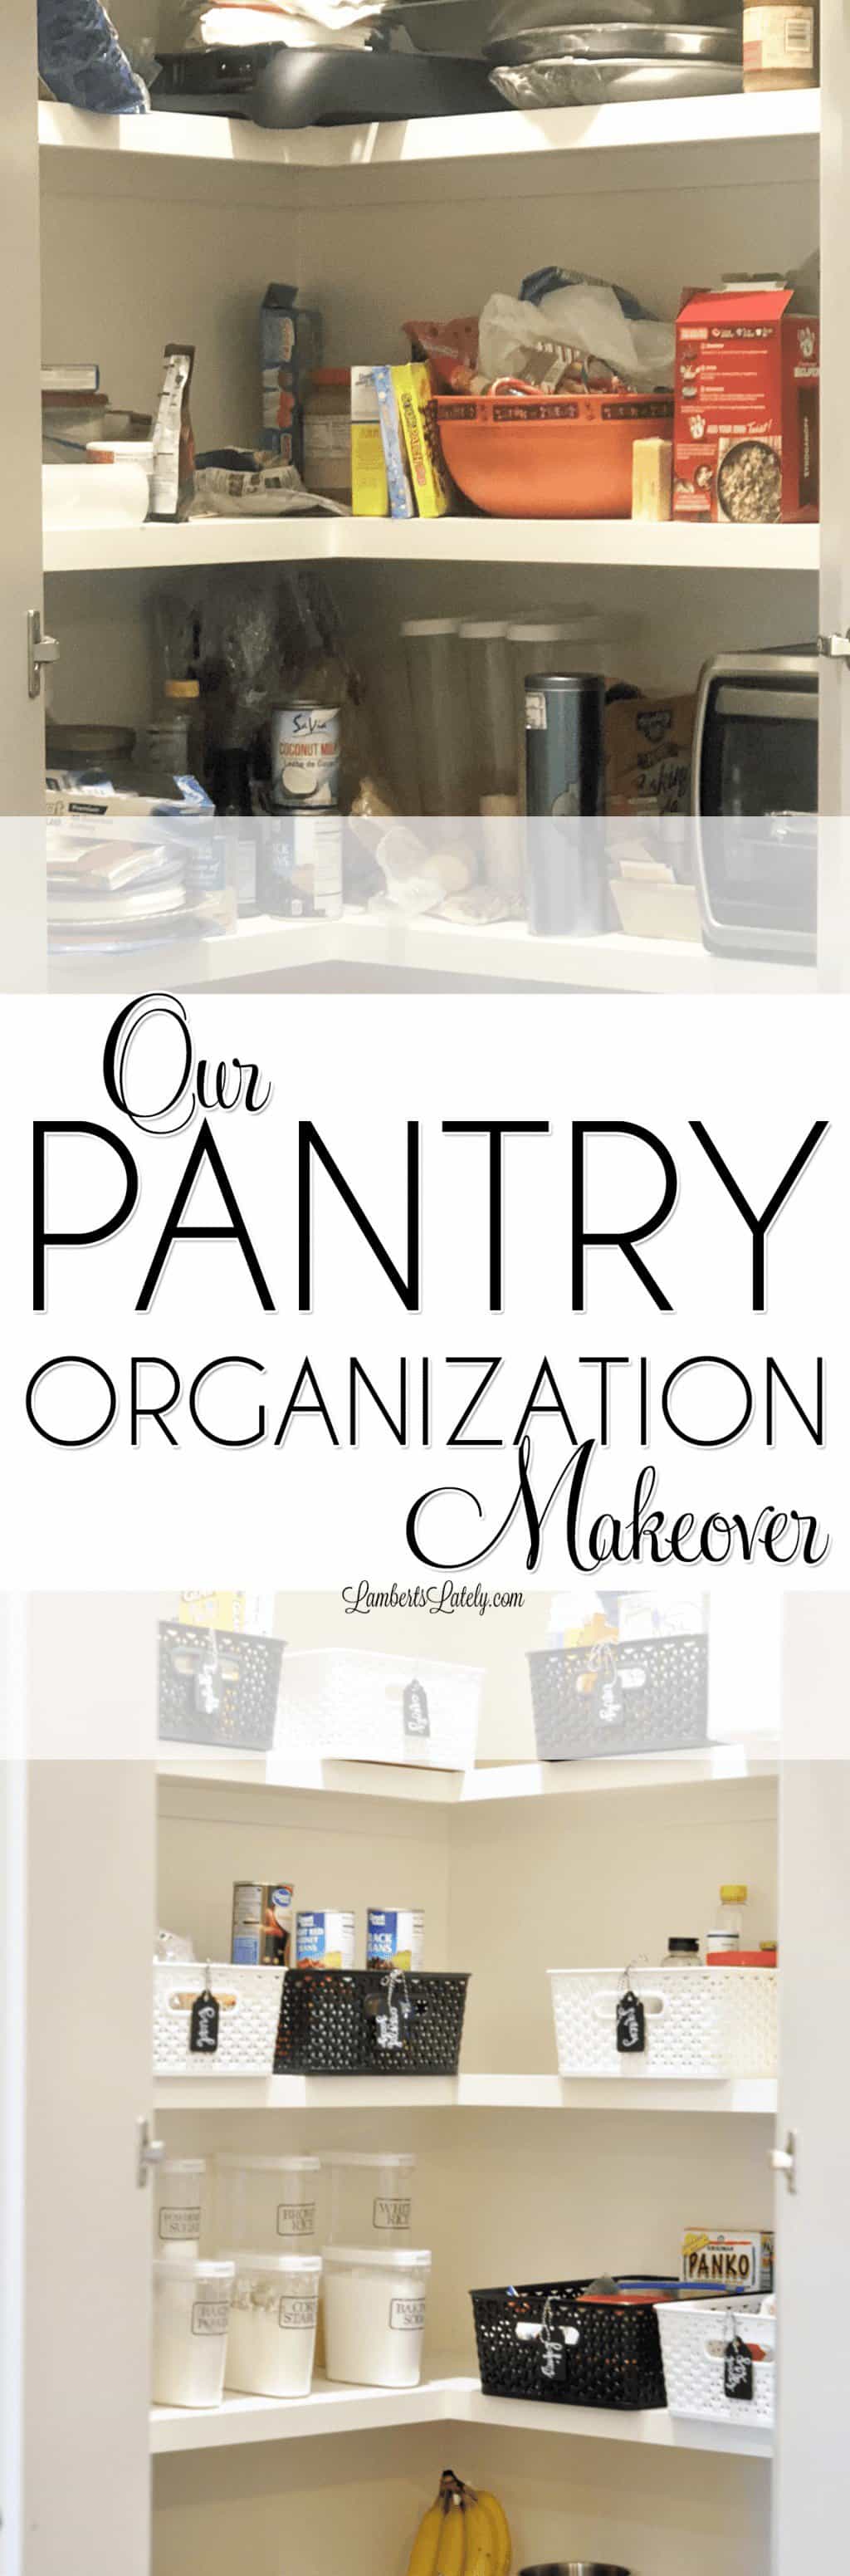 The before and after of this DIY pantry organization makeover is awesome! She completely redid her walk-in pantry on a budget with cute, farmhouse touches.